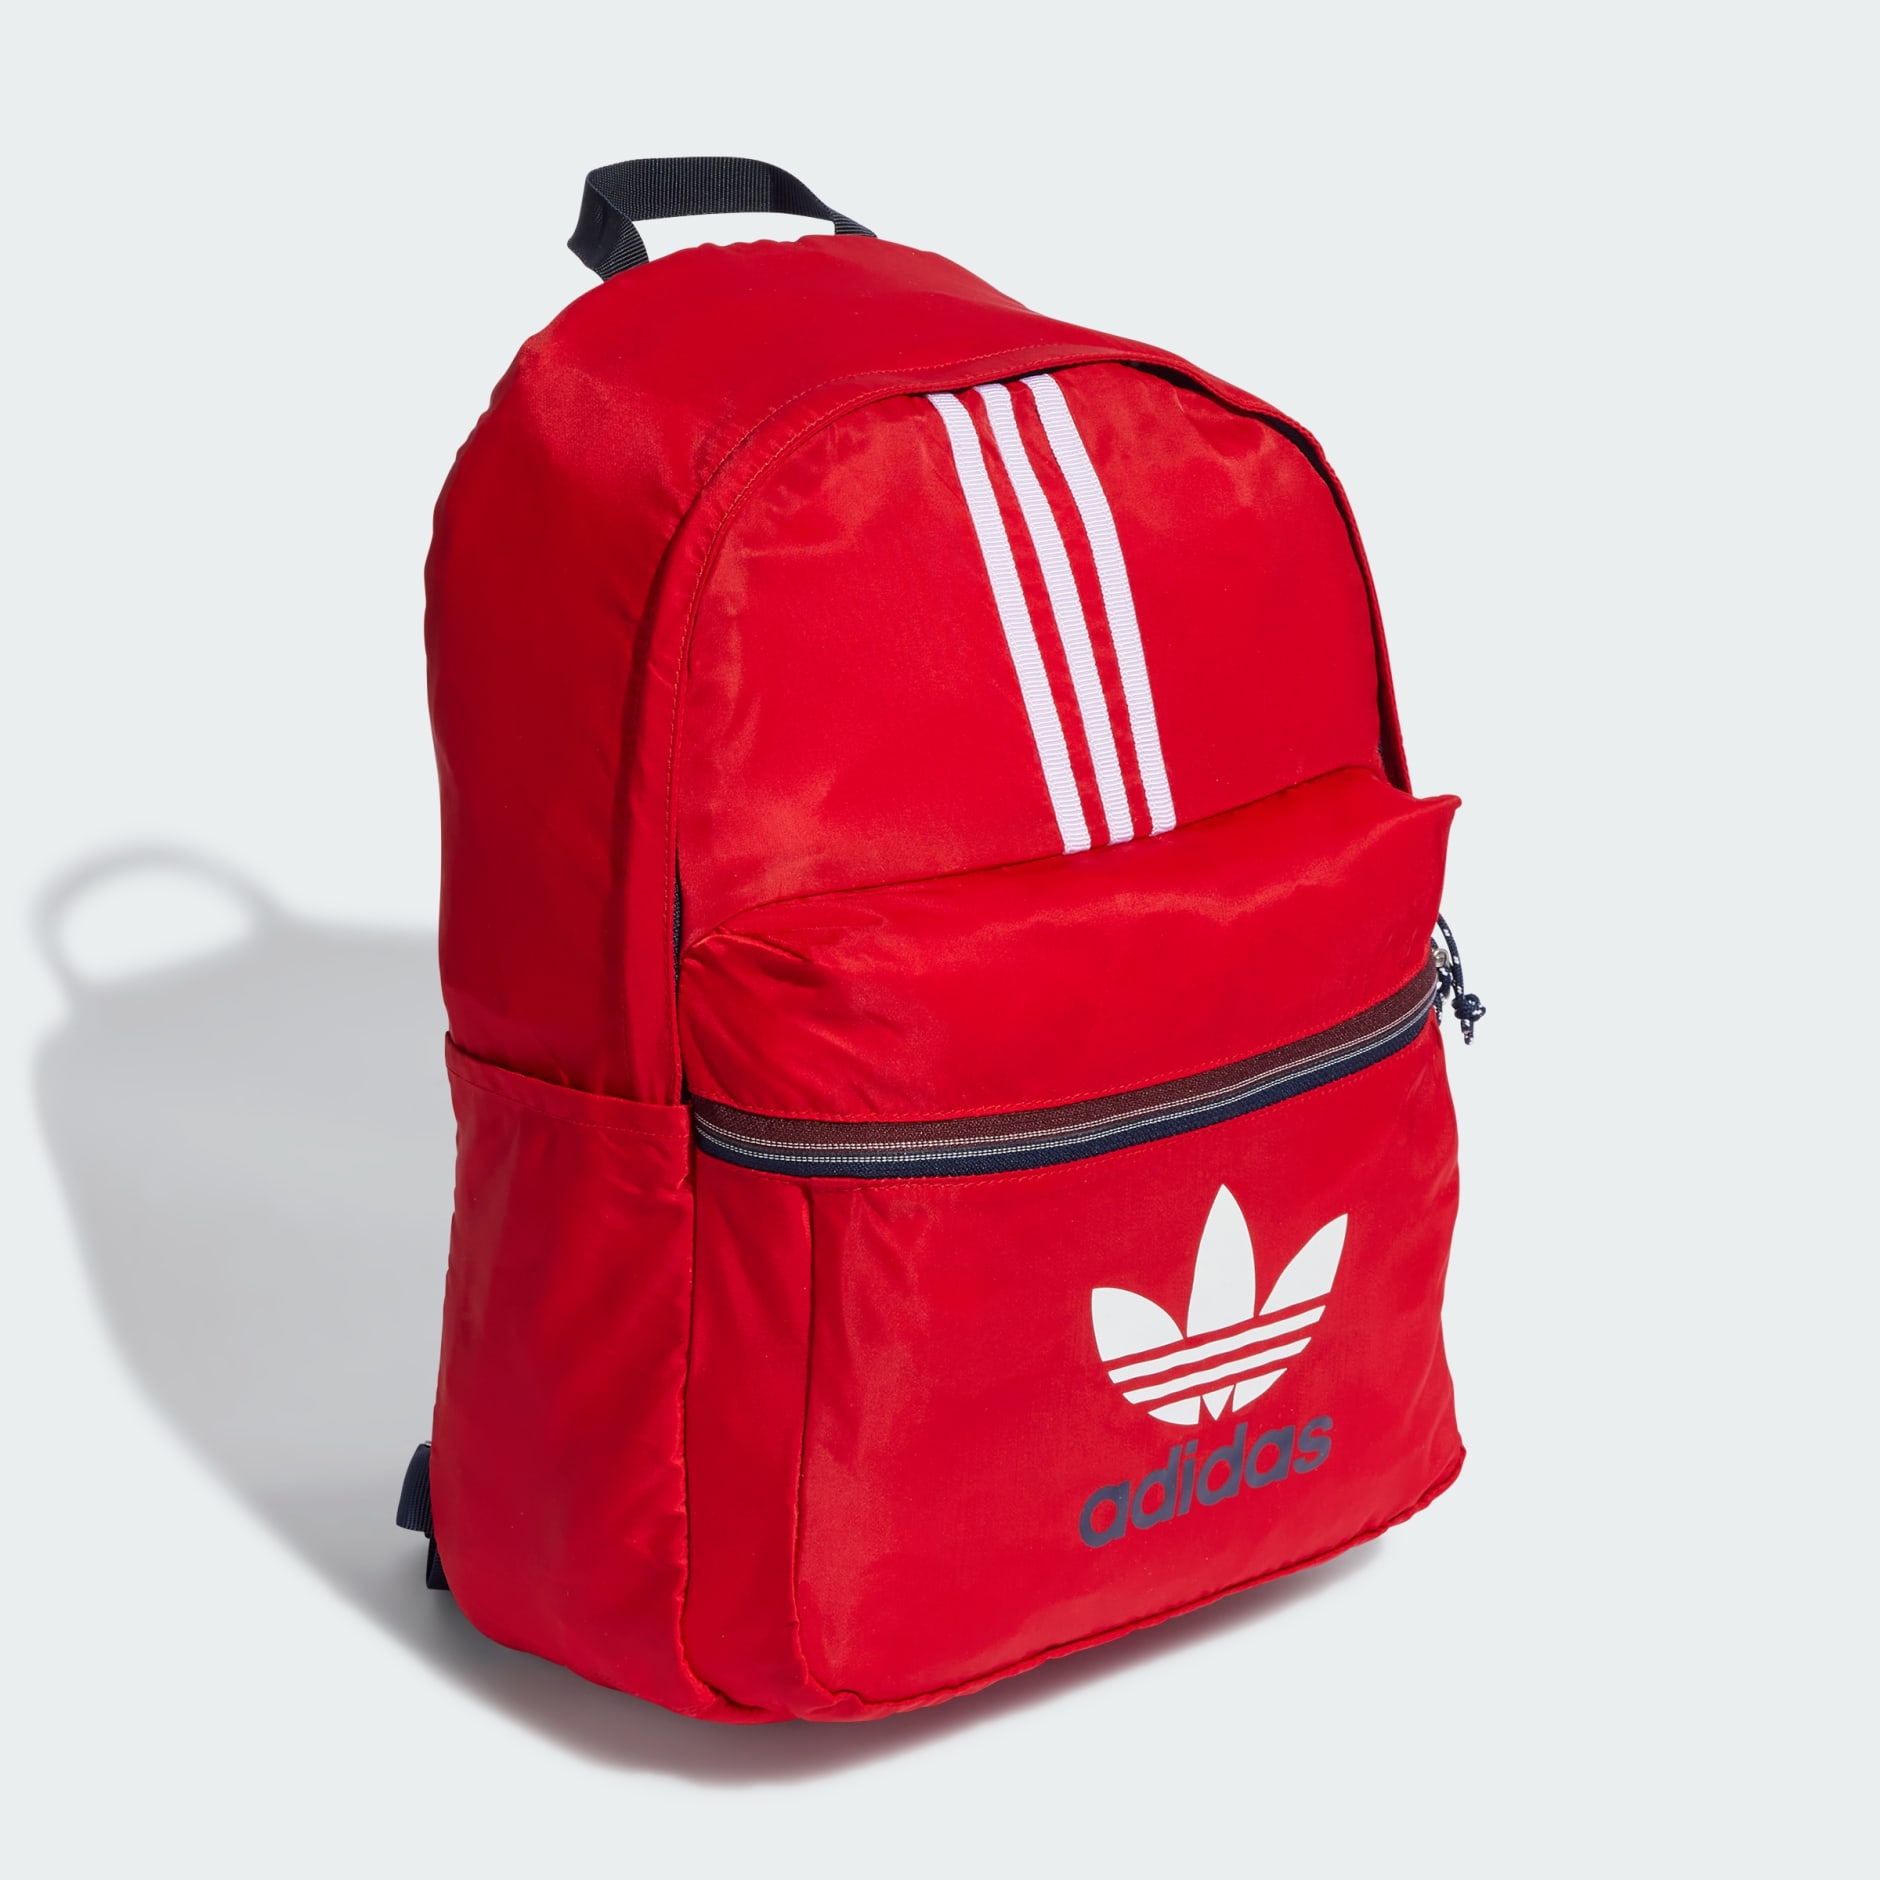 Accessories - Adicolor Archive Backpack Red Oman - adidas 